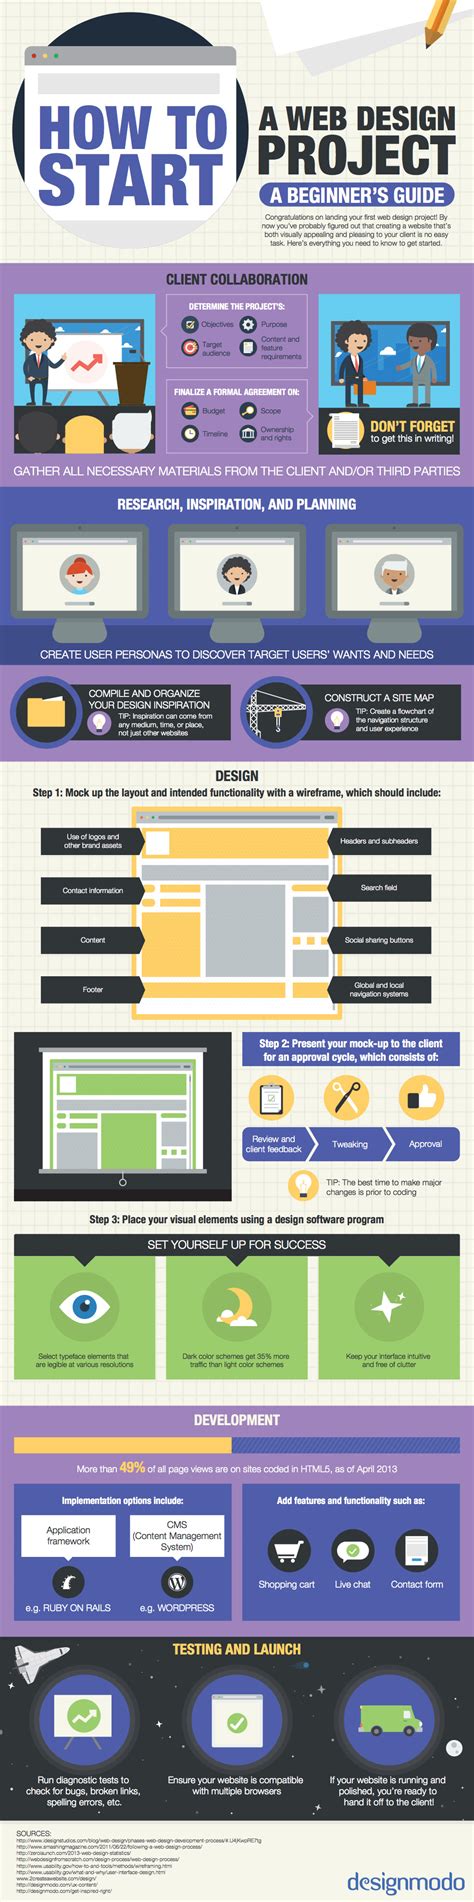 14 Web Design Infographics To Help You Design And Build Better Websites